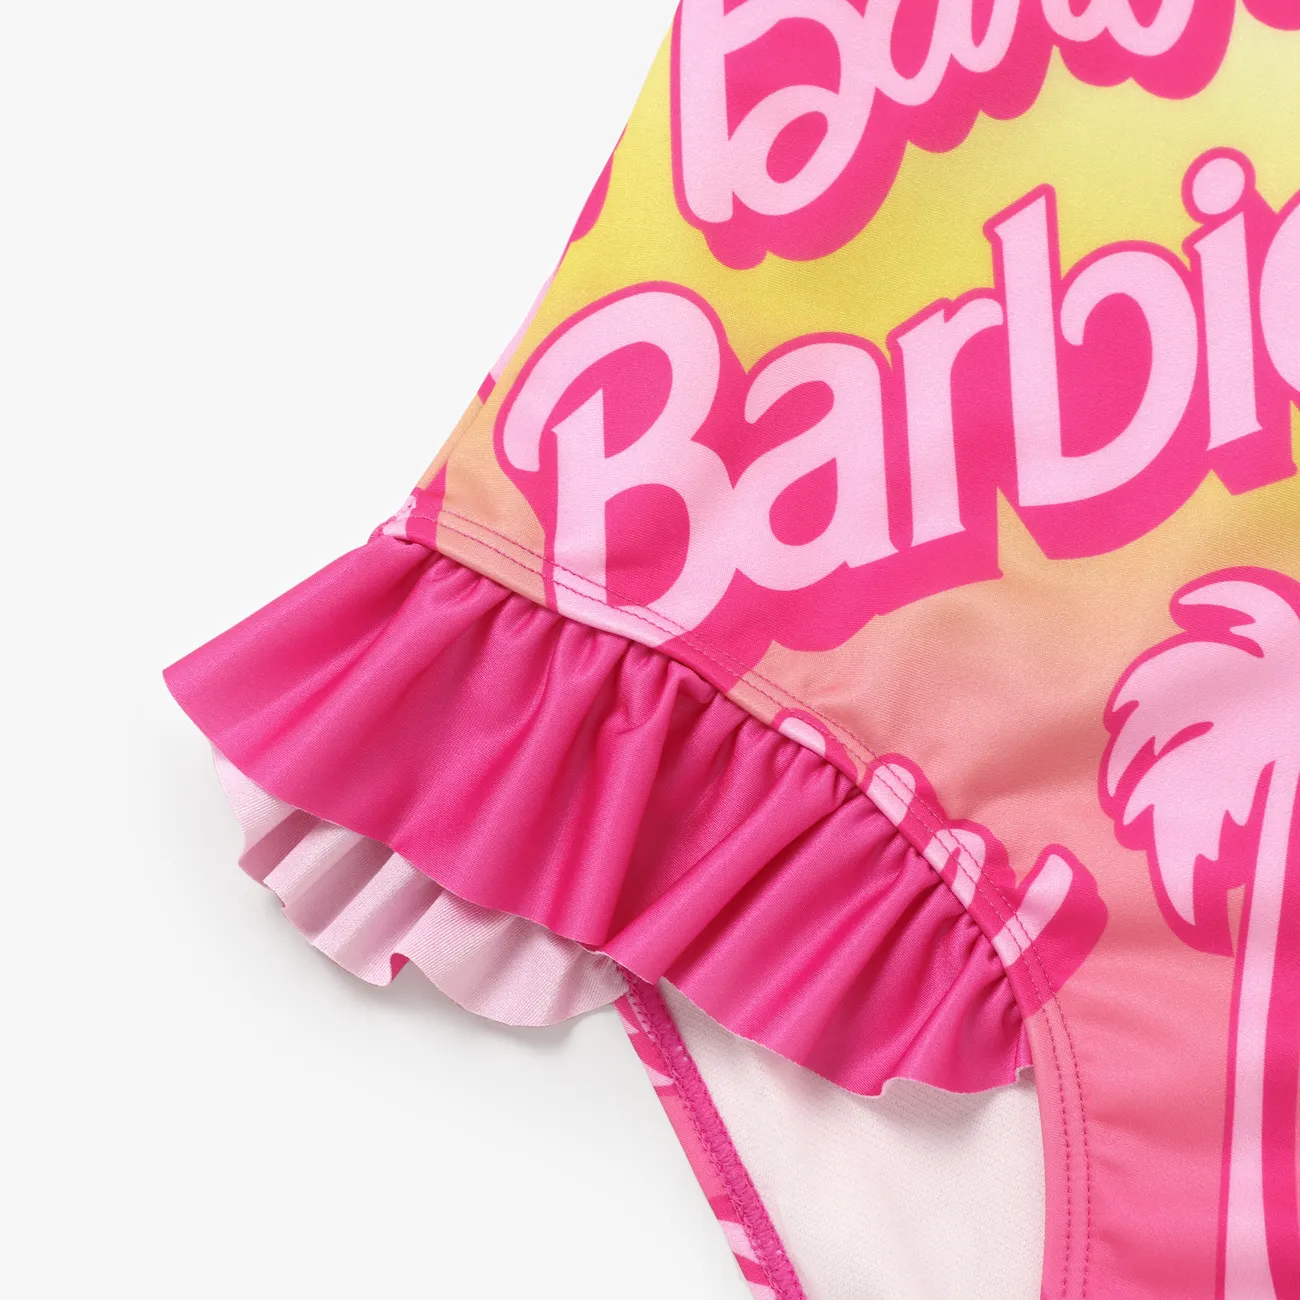 Barbie Mommy and Me Big Letter Logo Gradient Beach Ruffles Strap One-Piece Swimsuit Colorful big image 1